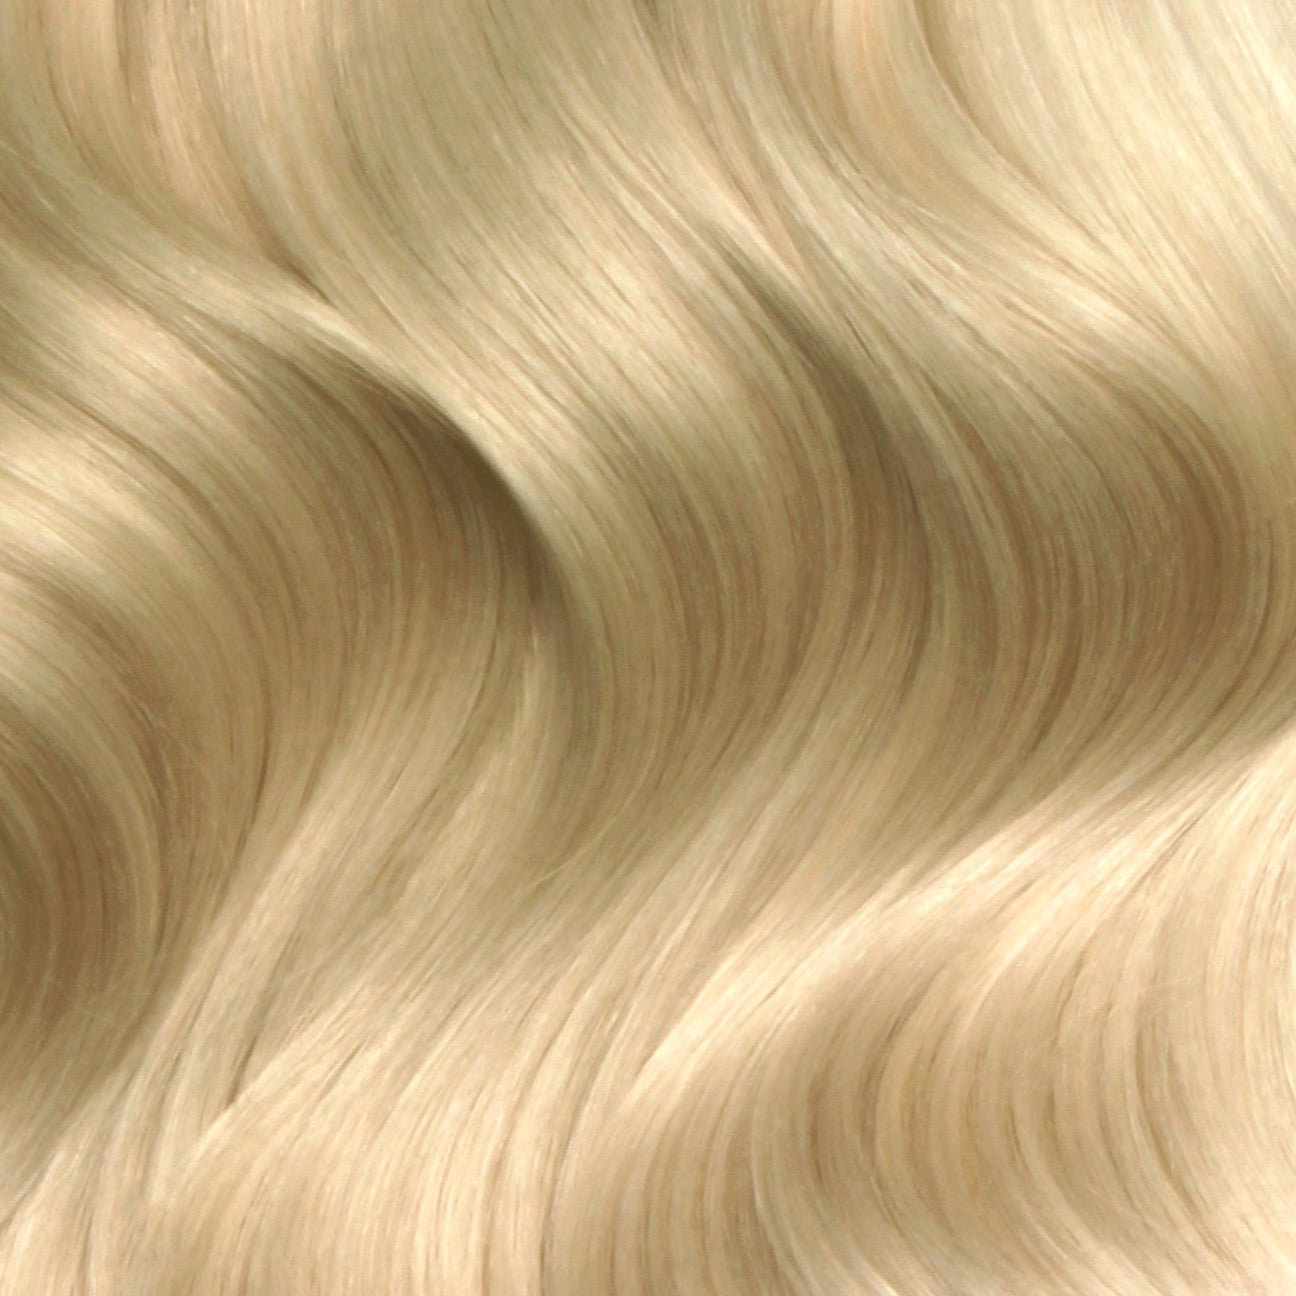 Nano Bonds 20 Inches - SWAY Hair Extensions LA-Blonde-613-24 Ultra-fine, invisible bonds for a flawless, natural look. 100% Remy Human hair, lightweight and versatile. Reusable and perfect for individual or salon use.